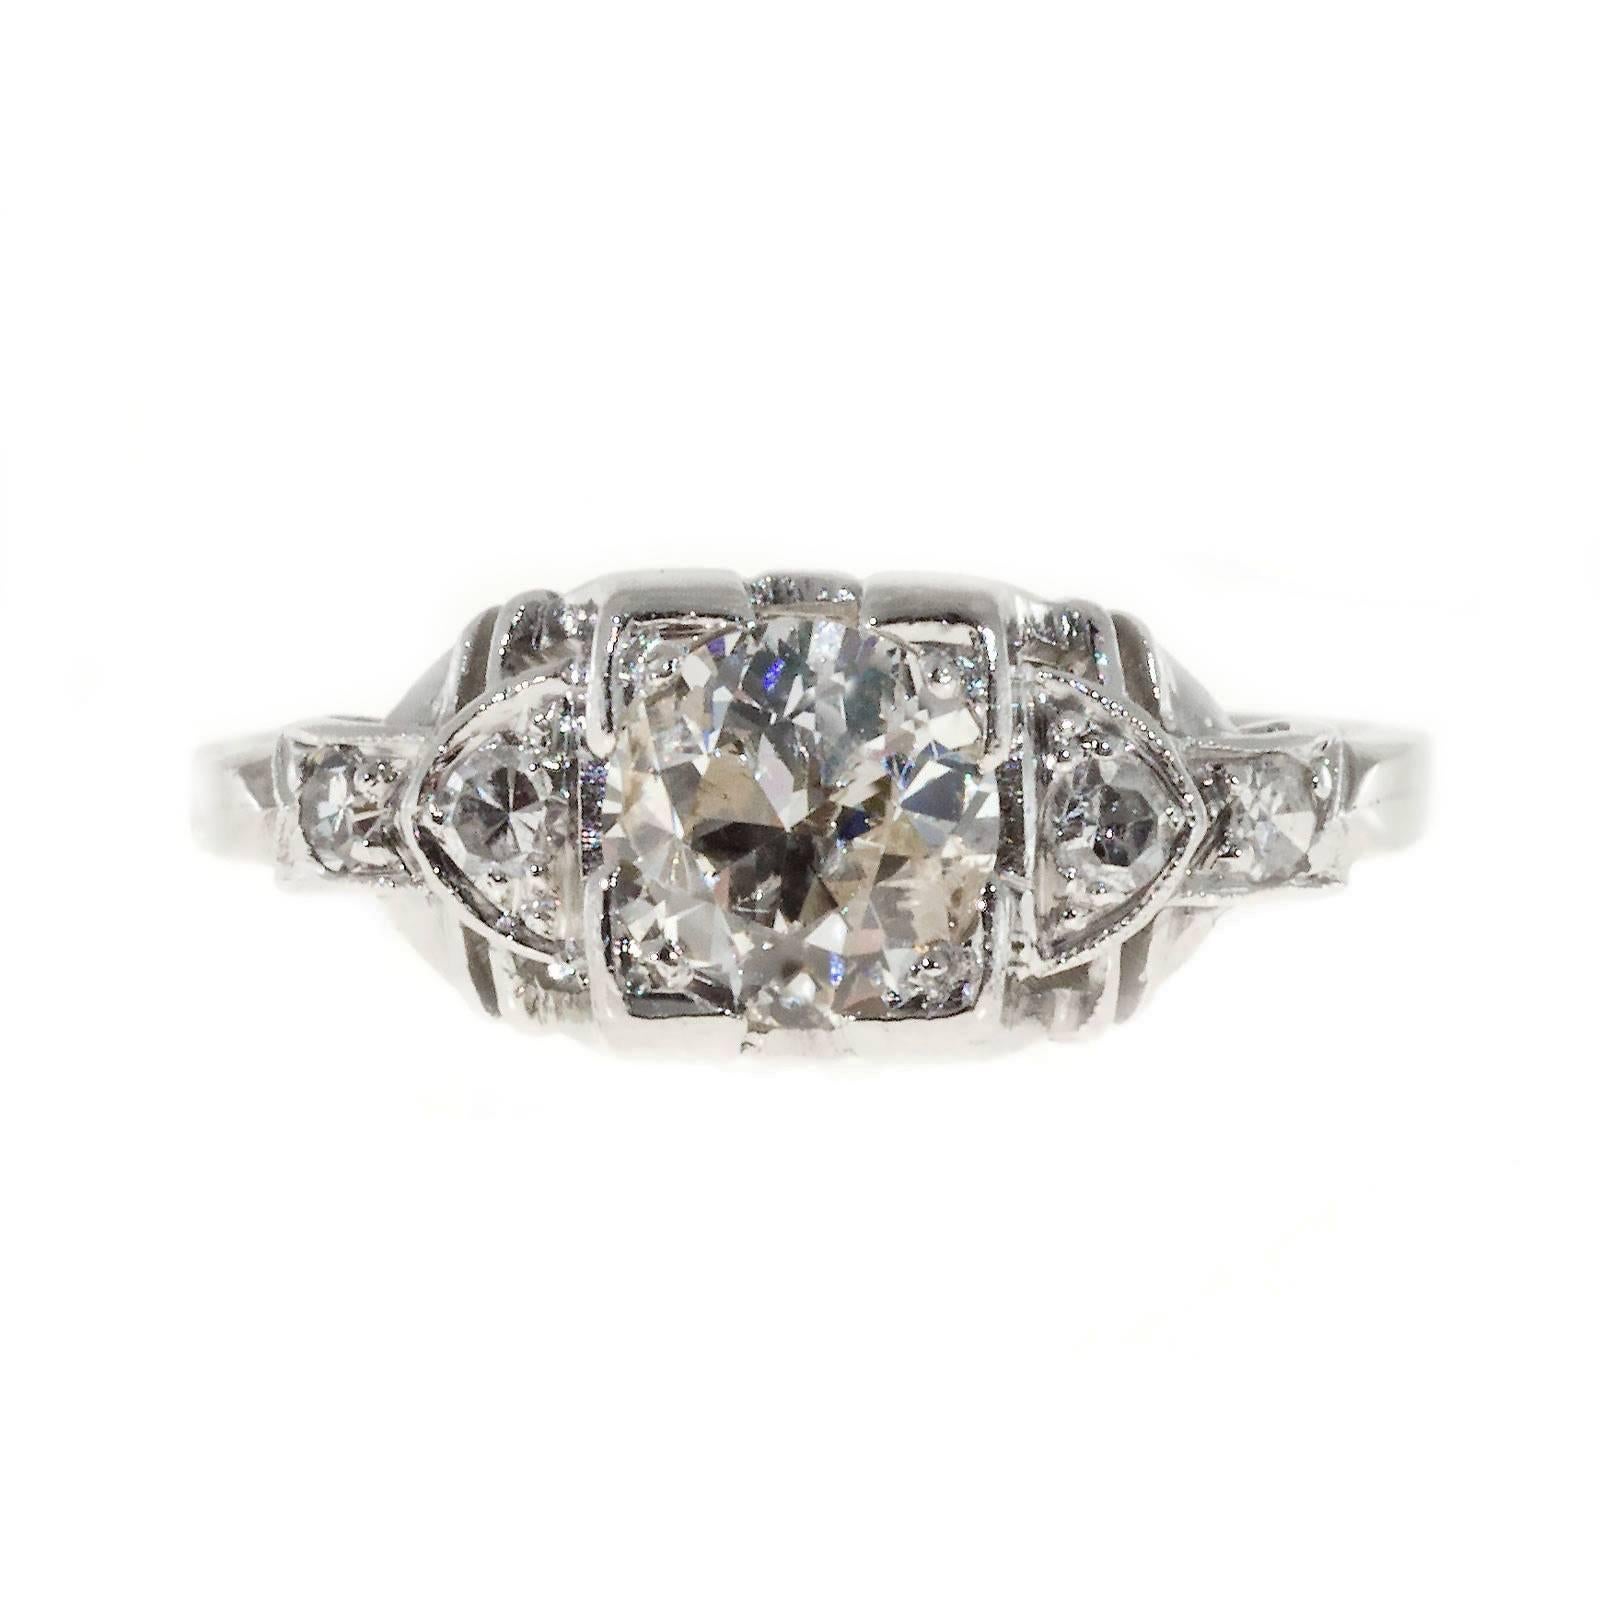  Art Deco 1930s Platinum engagement ring with square top set with one Ideal cut transitional brilliant cut diamond and four single cut diamonds. Crt

1 transitional cut diamond, approx. total weight .65cts, H - I, I1, 5.72 x 5.58mm, Depth: 61.5% 